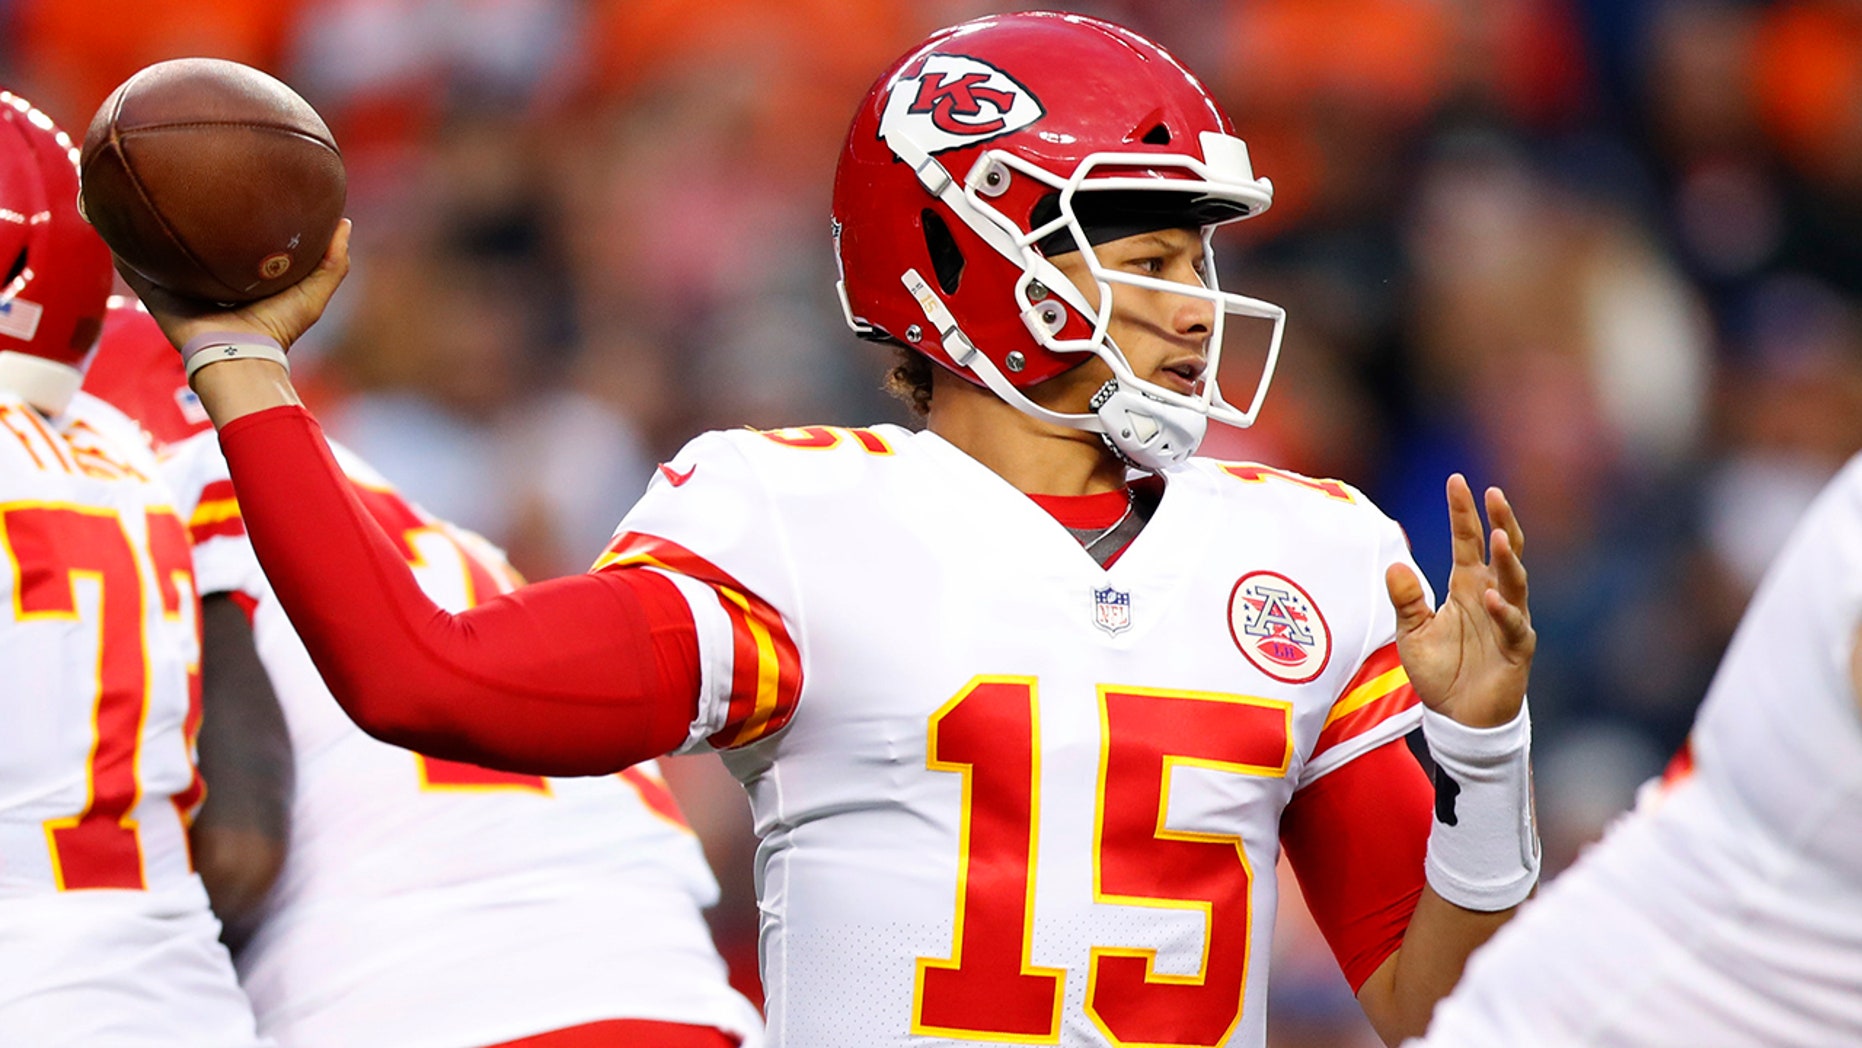 Patrick Mahomes dazzles with left-handed pass on Kansas City Chiefs' game-winning drive | Fox News